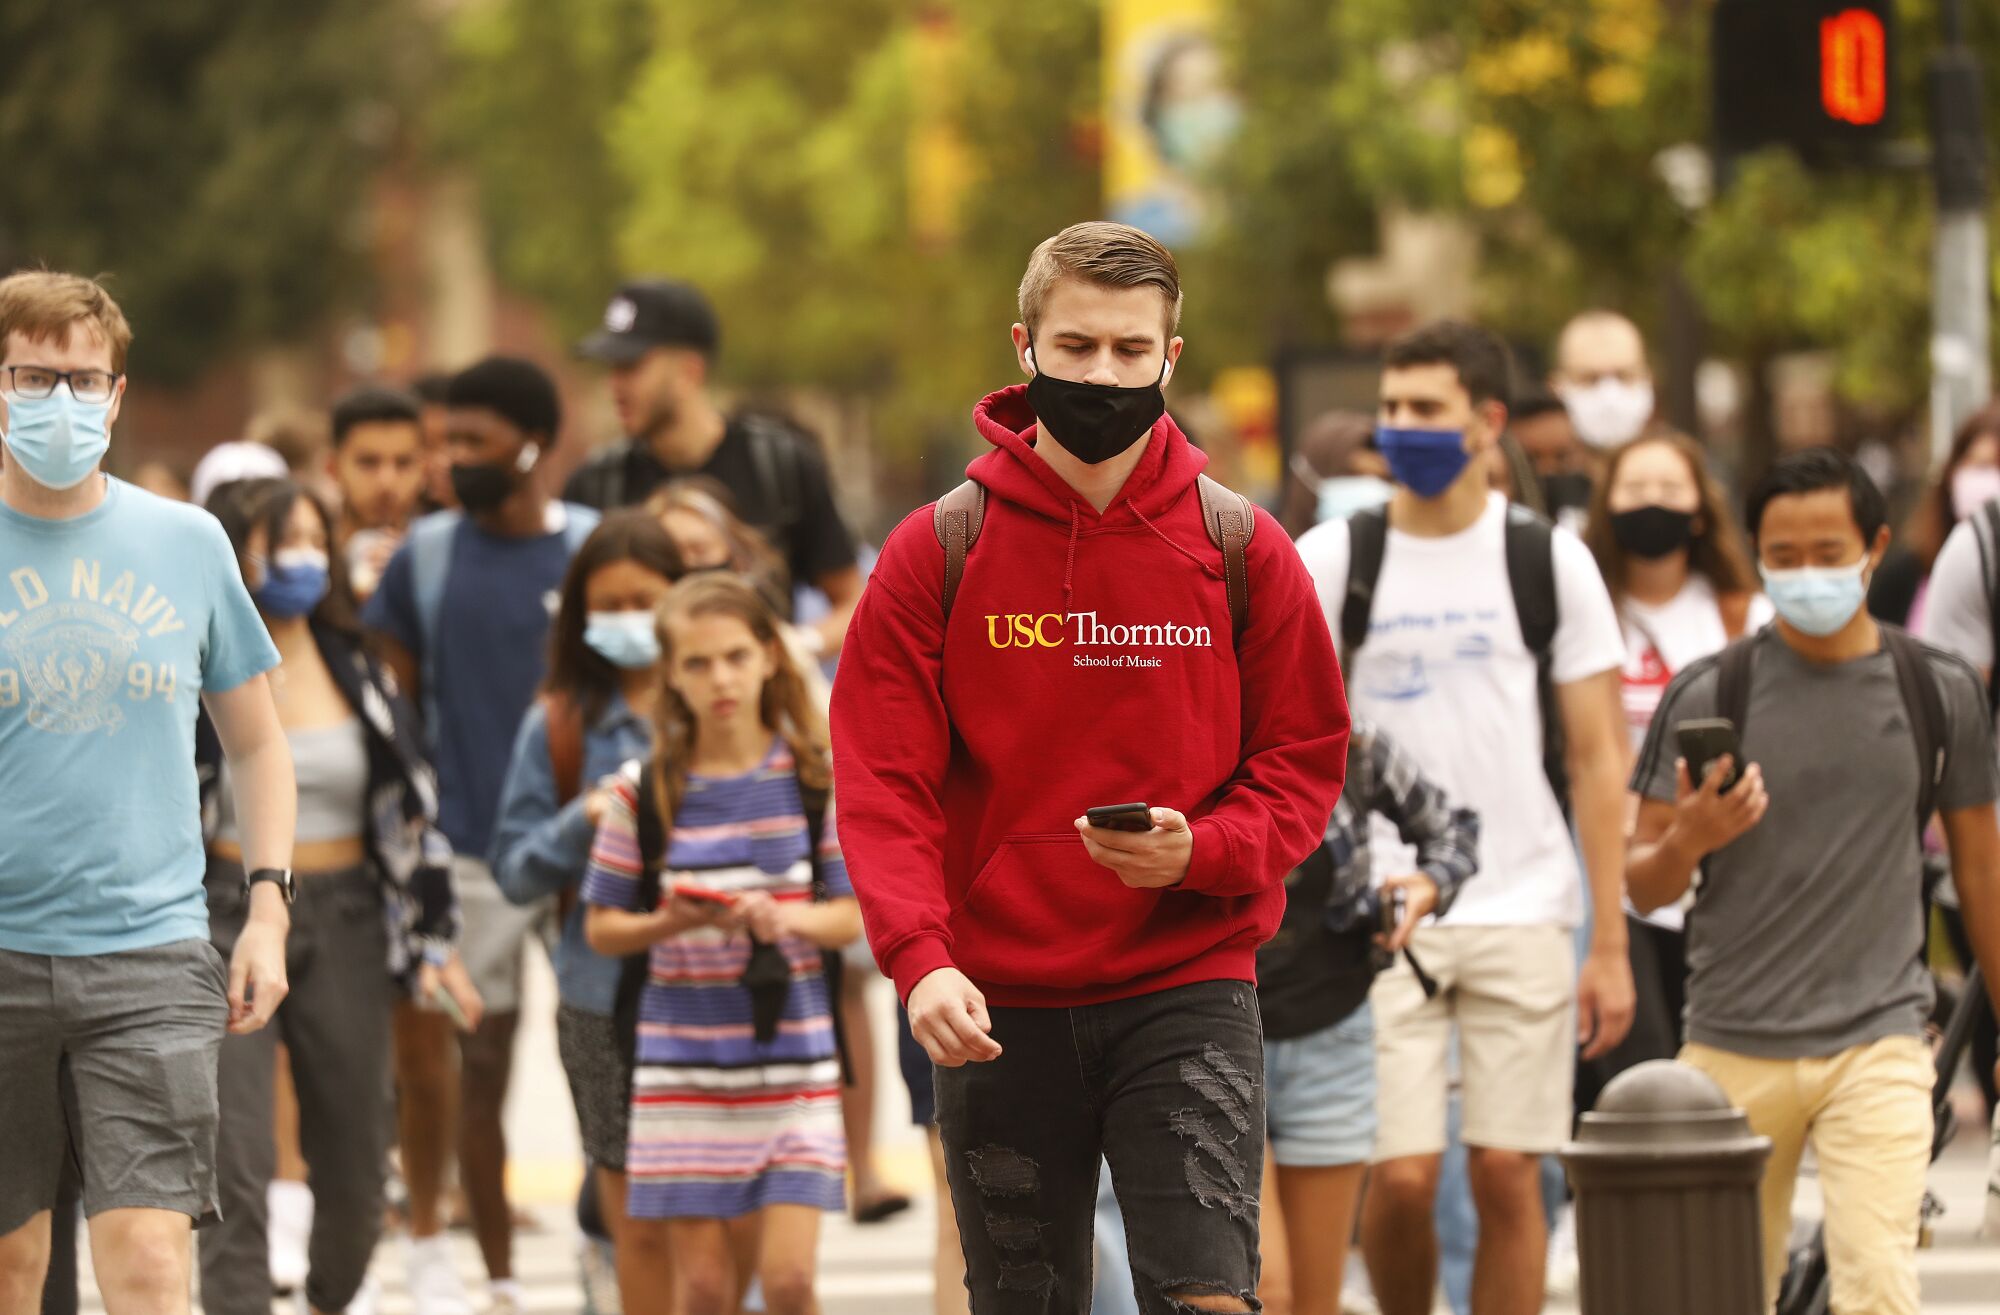 USC and California State University campuses have begun in-person classes.